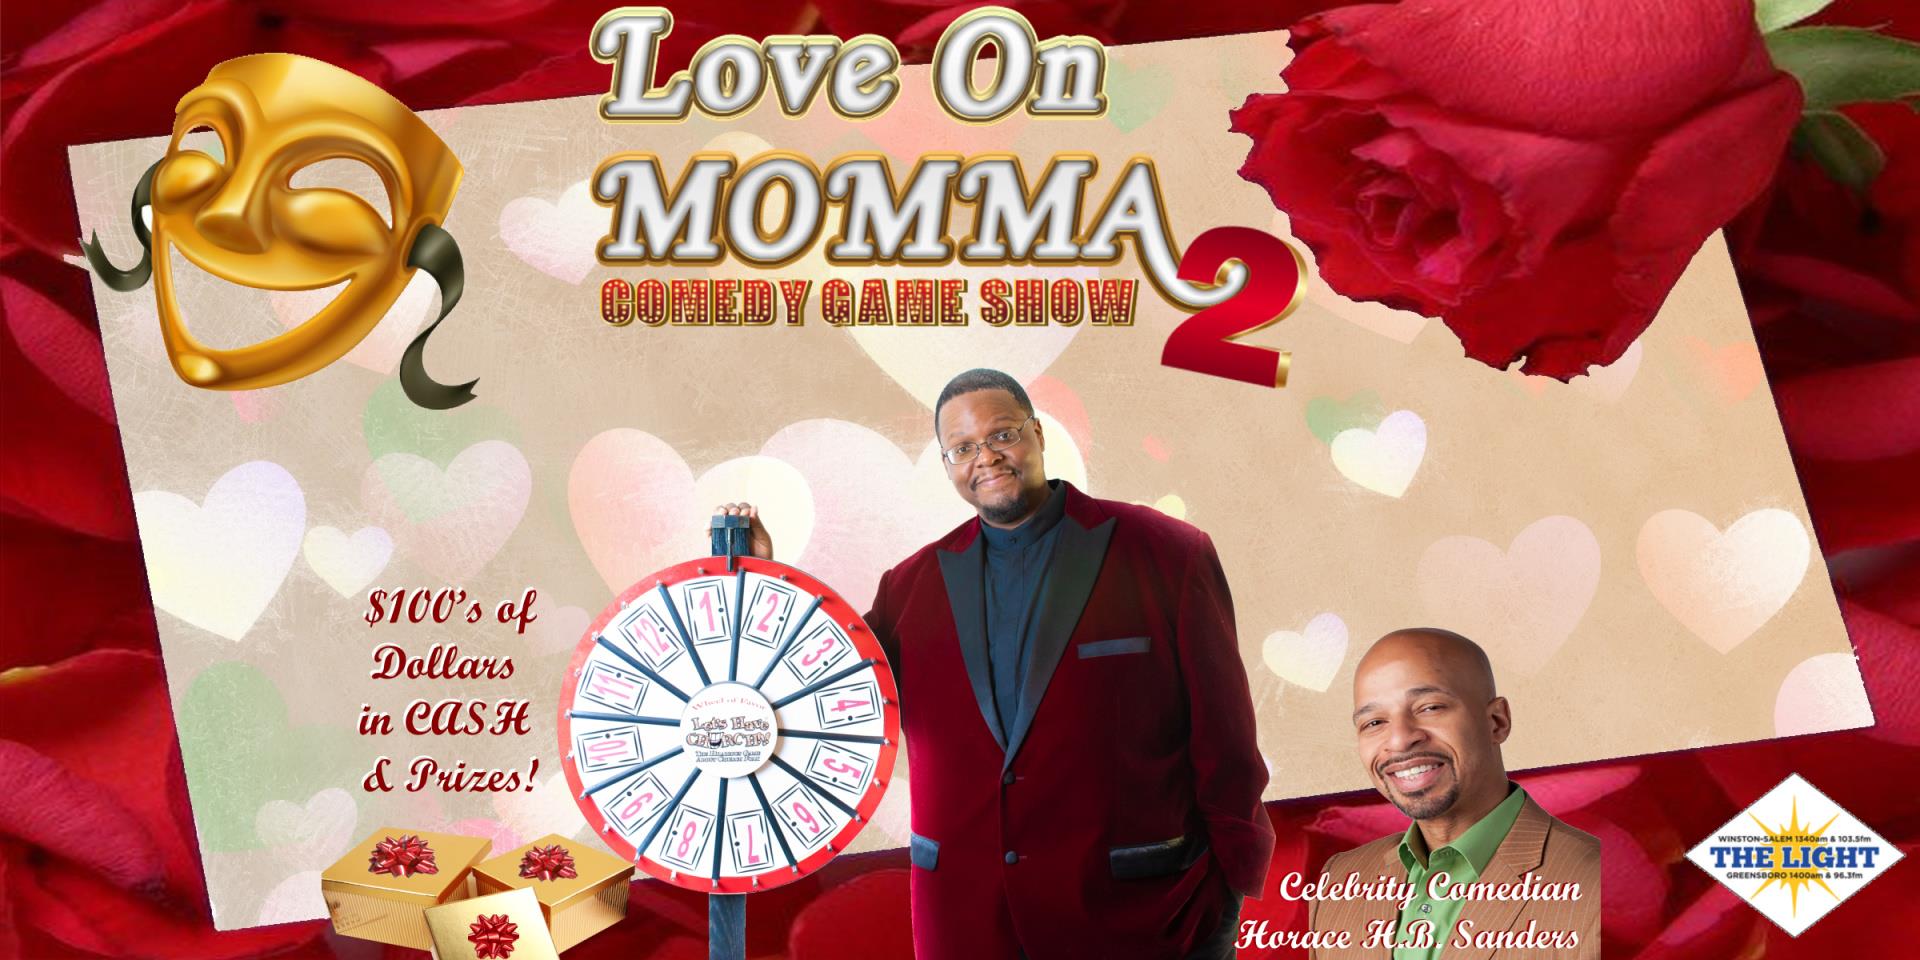 Love on Momma 2 Comedy Game Show In the Crown